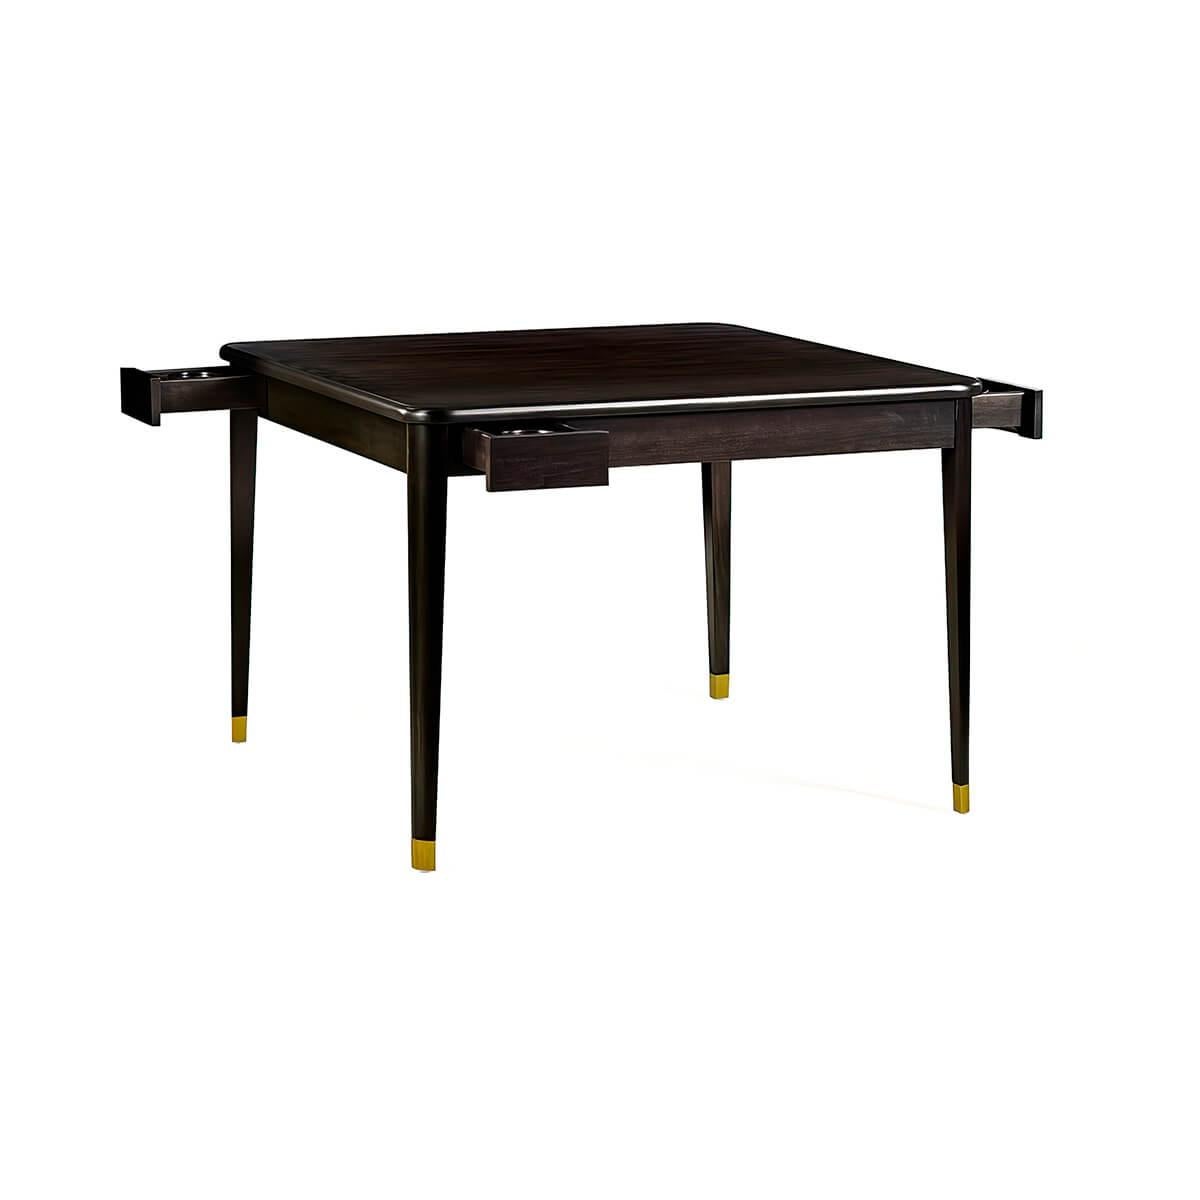 Characterized by its clean, straight lines and minimalist aesthetic, the square table has a warm hand-rubbed dark stain finish. The design features a square top with rounded edges and corners, and tapered legs with brass caps, contributing to a